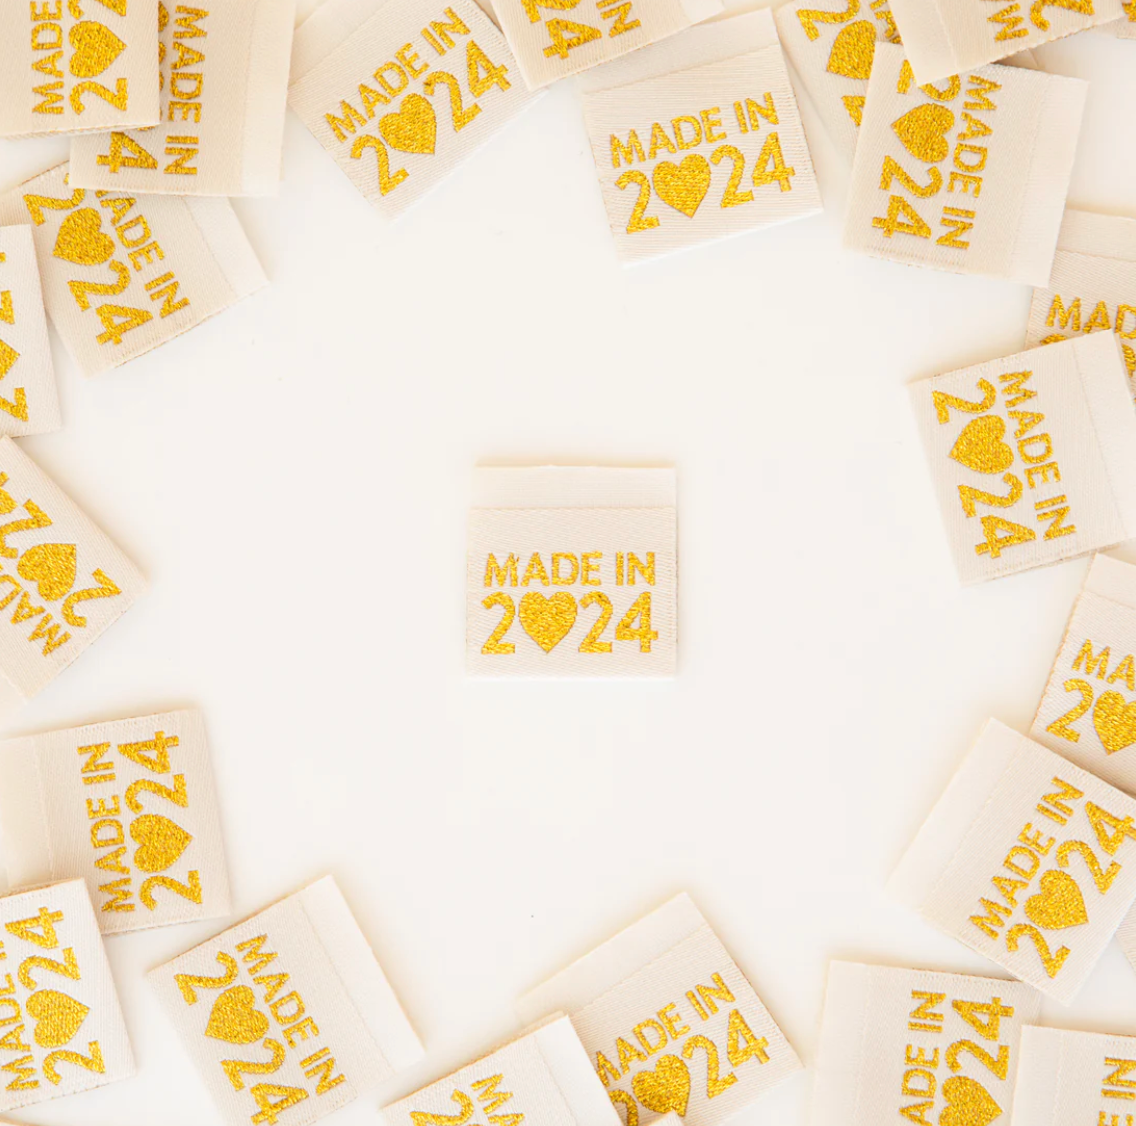 Made in 2024 Gold - Sewing Woven Clothing Label Tags